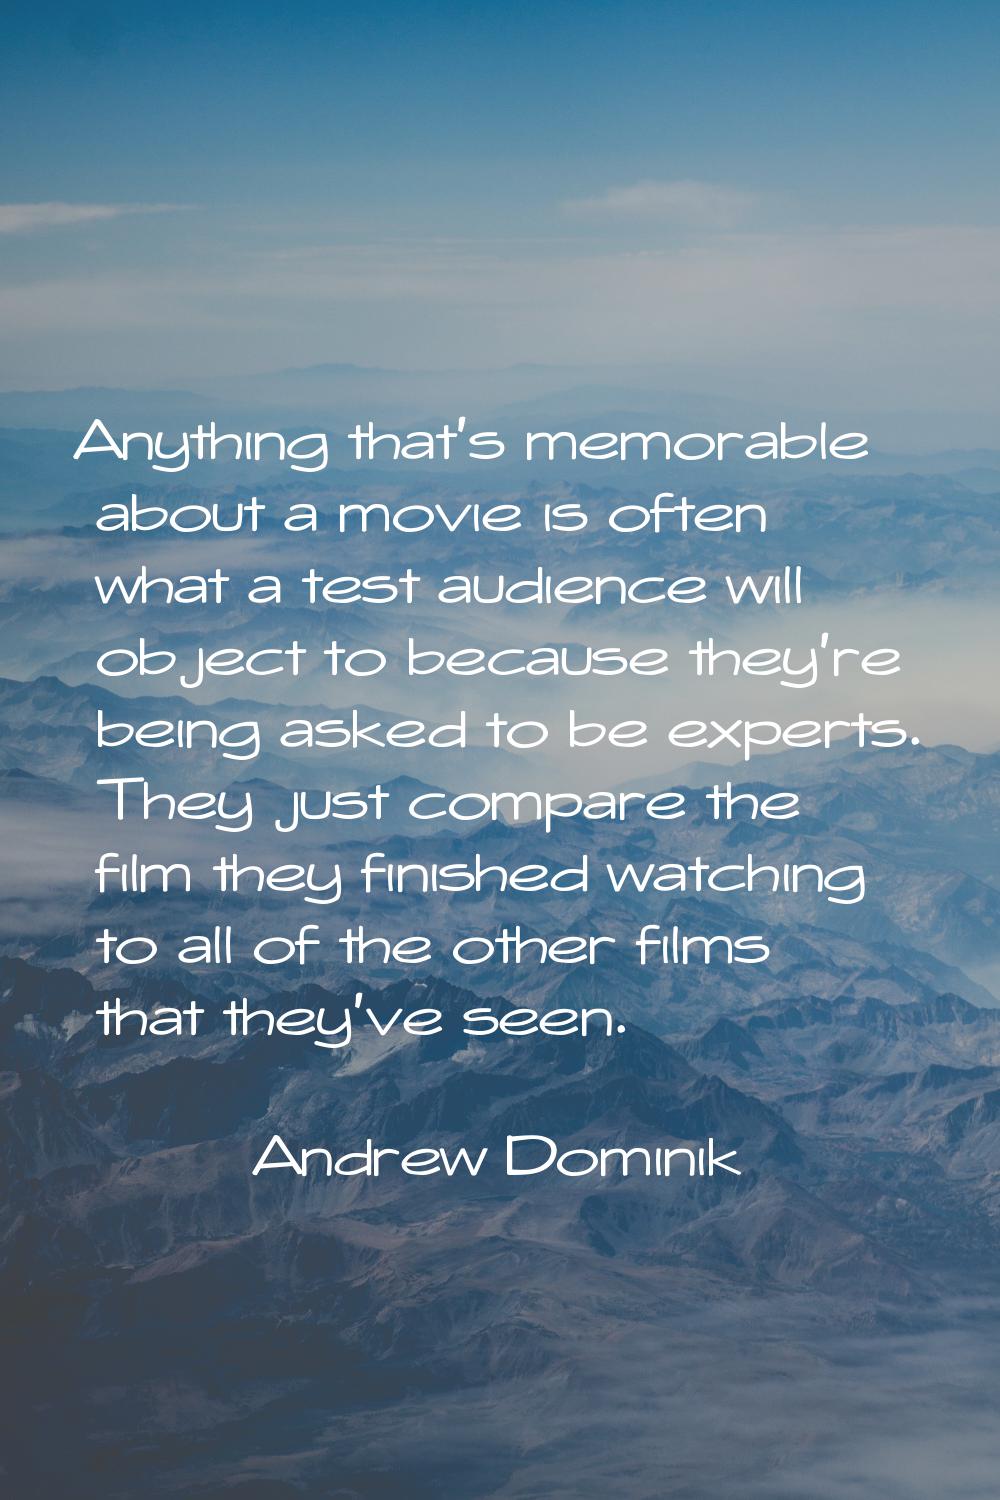 Anything that's memorable about a movie is often what a test audience will object to because they'r